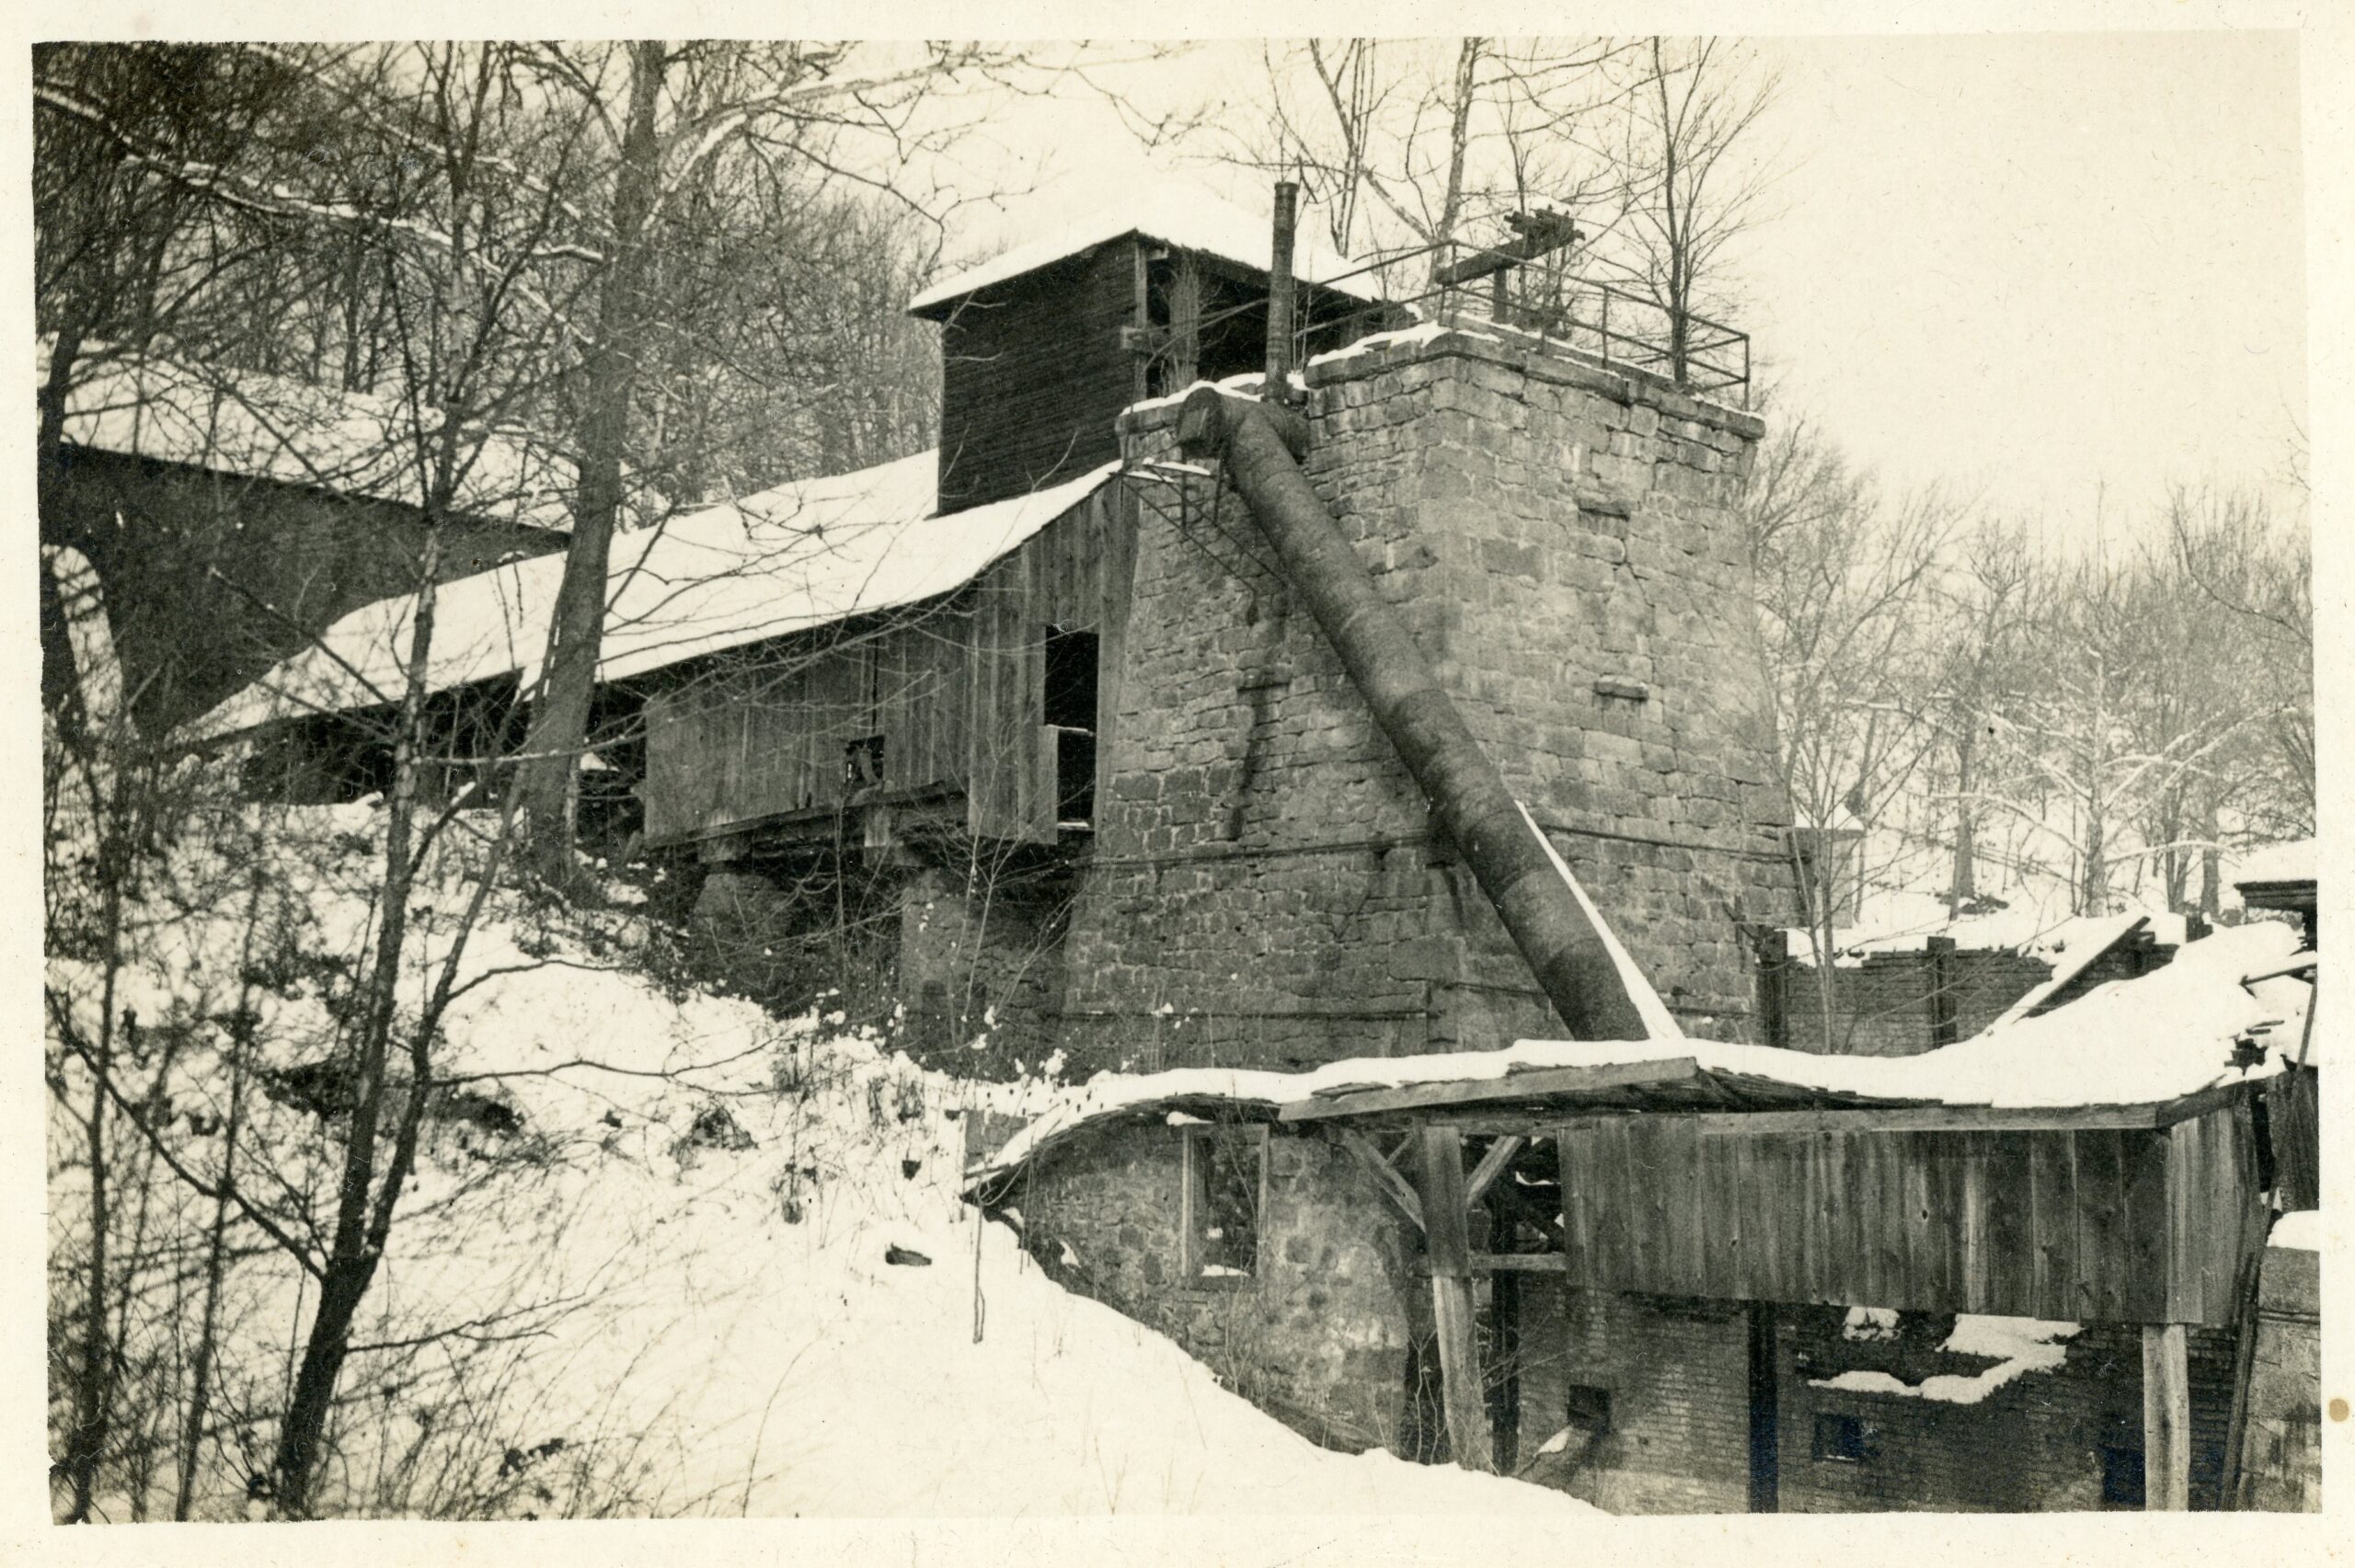 Furnace building in the winter.